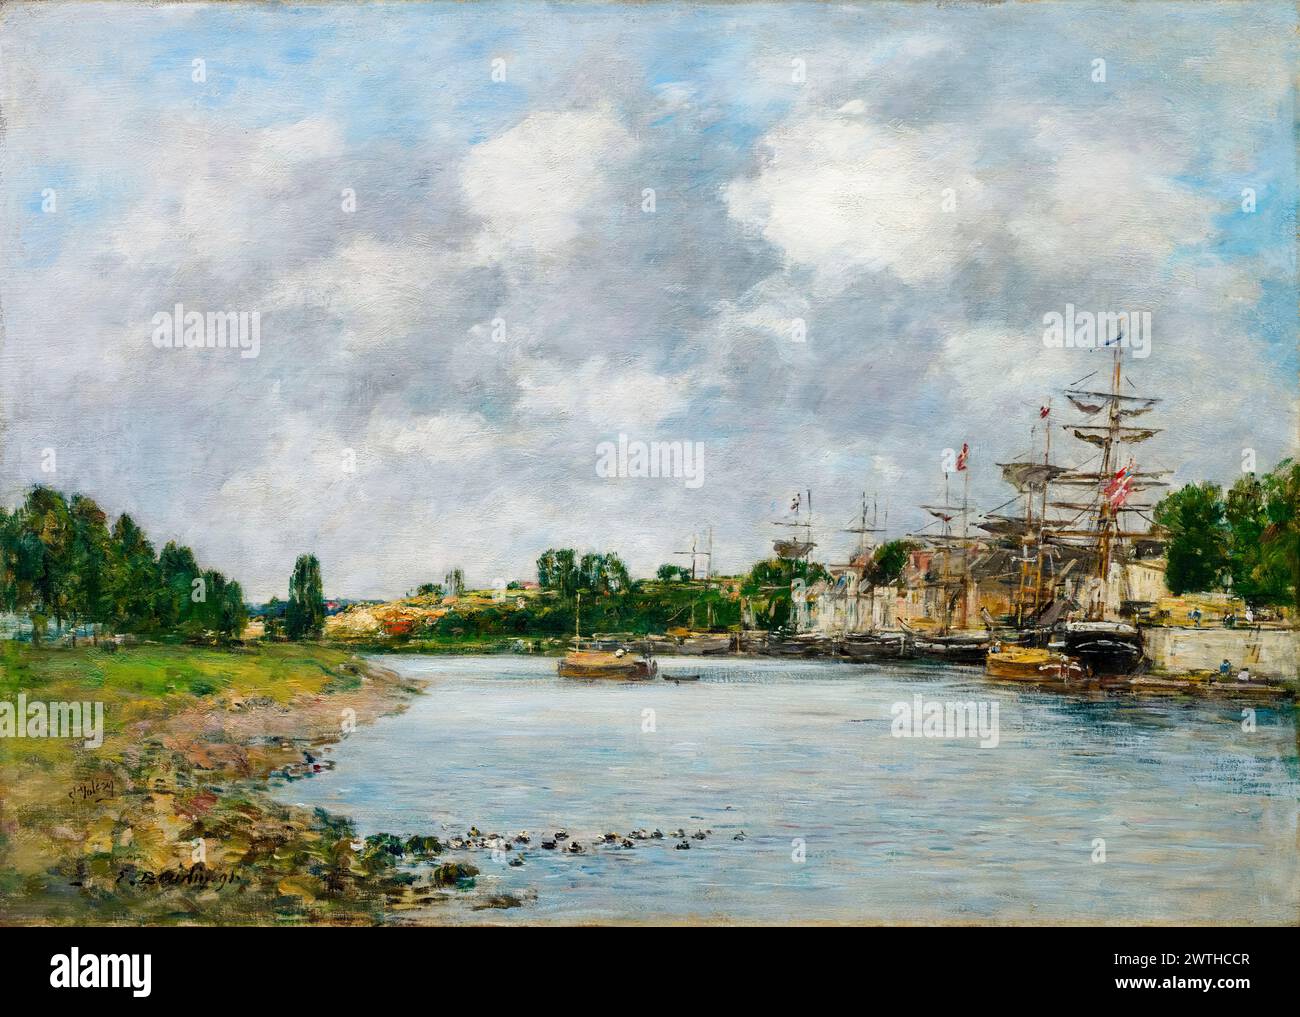 Eugène Boudin, View of the Port of Saint-Valéry-sur-Somme, landscape painting in oil on canvas, 1891 Stock Photo